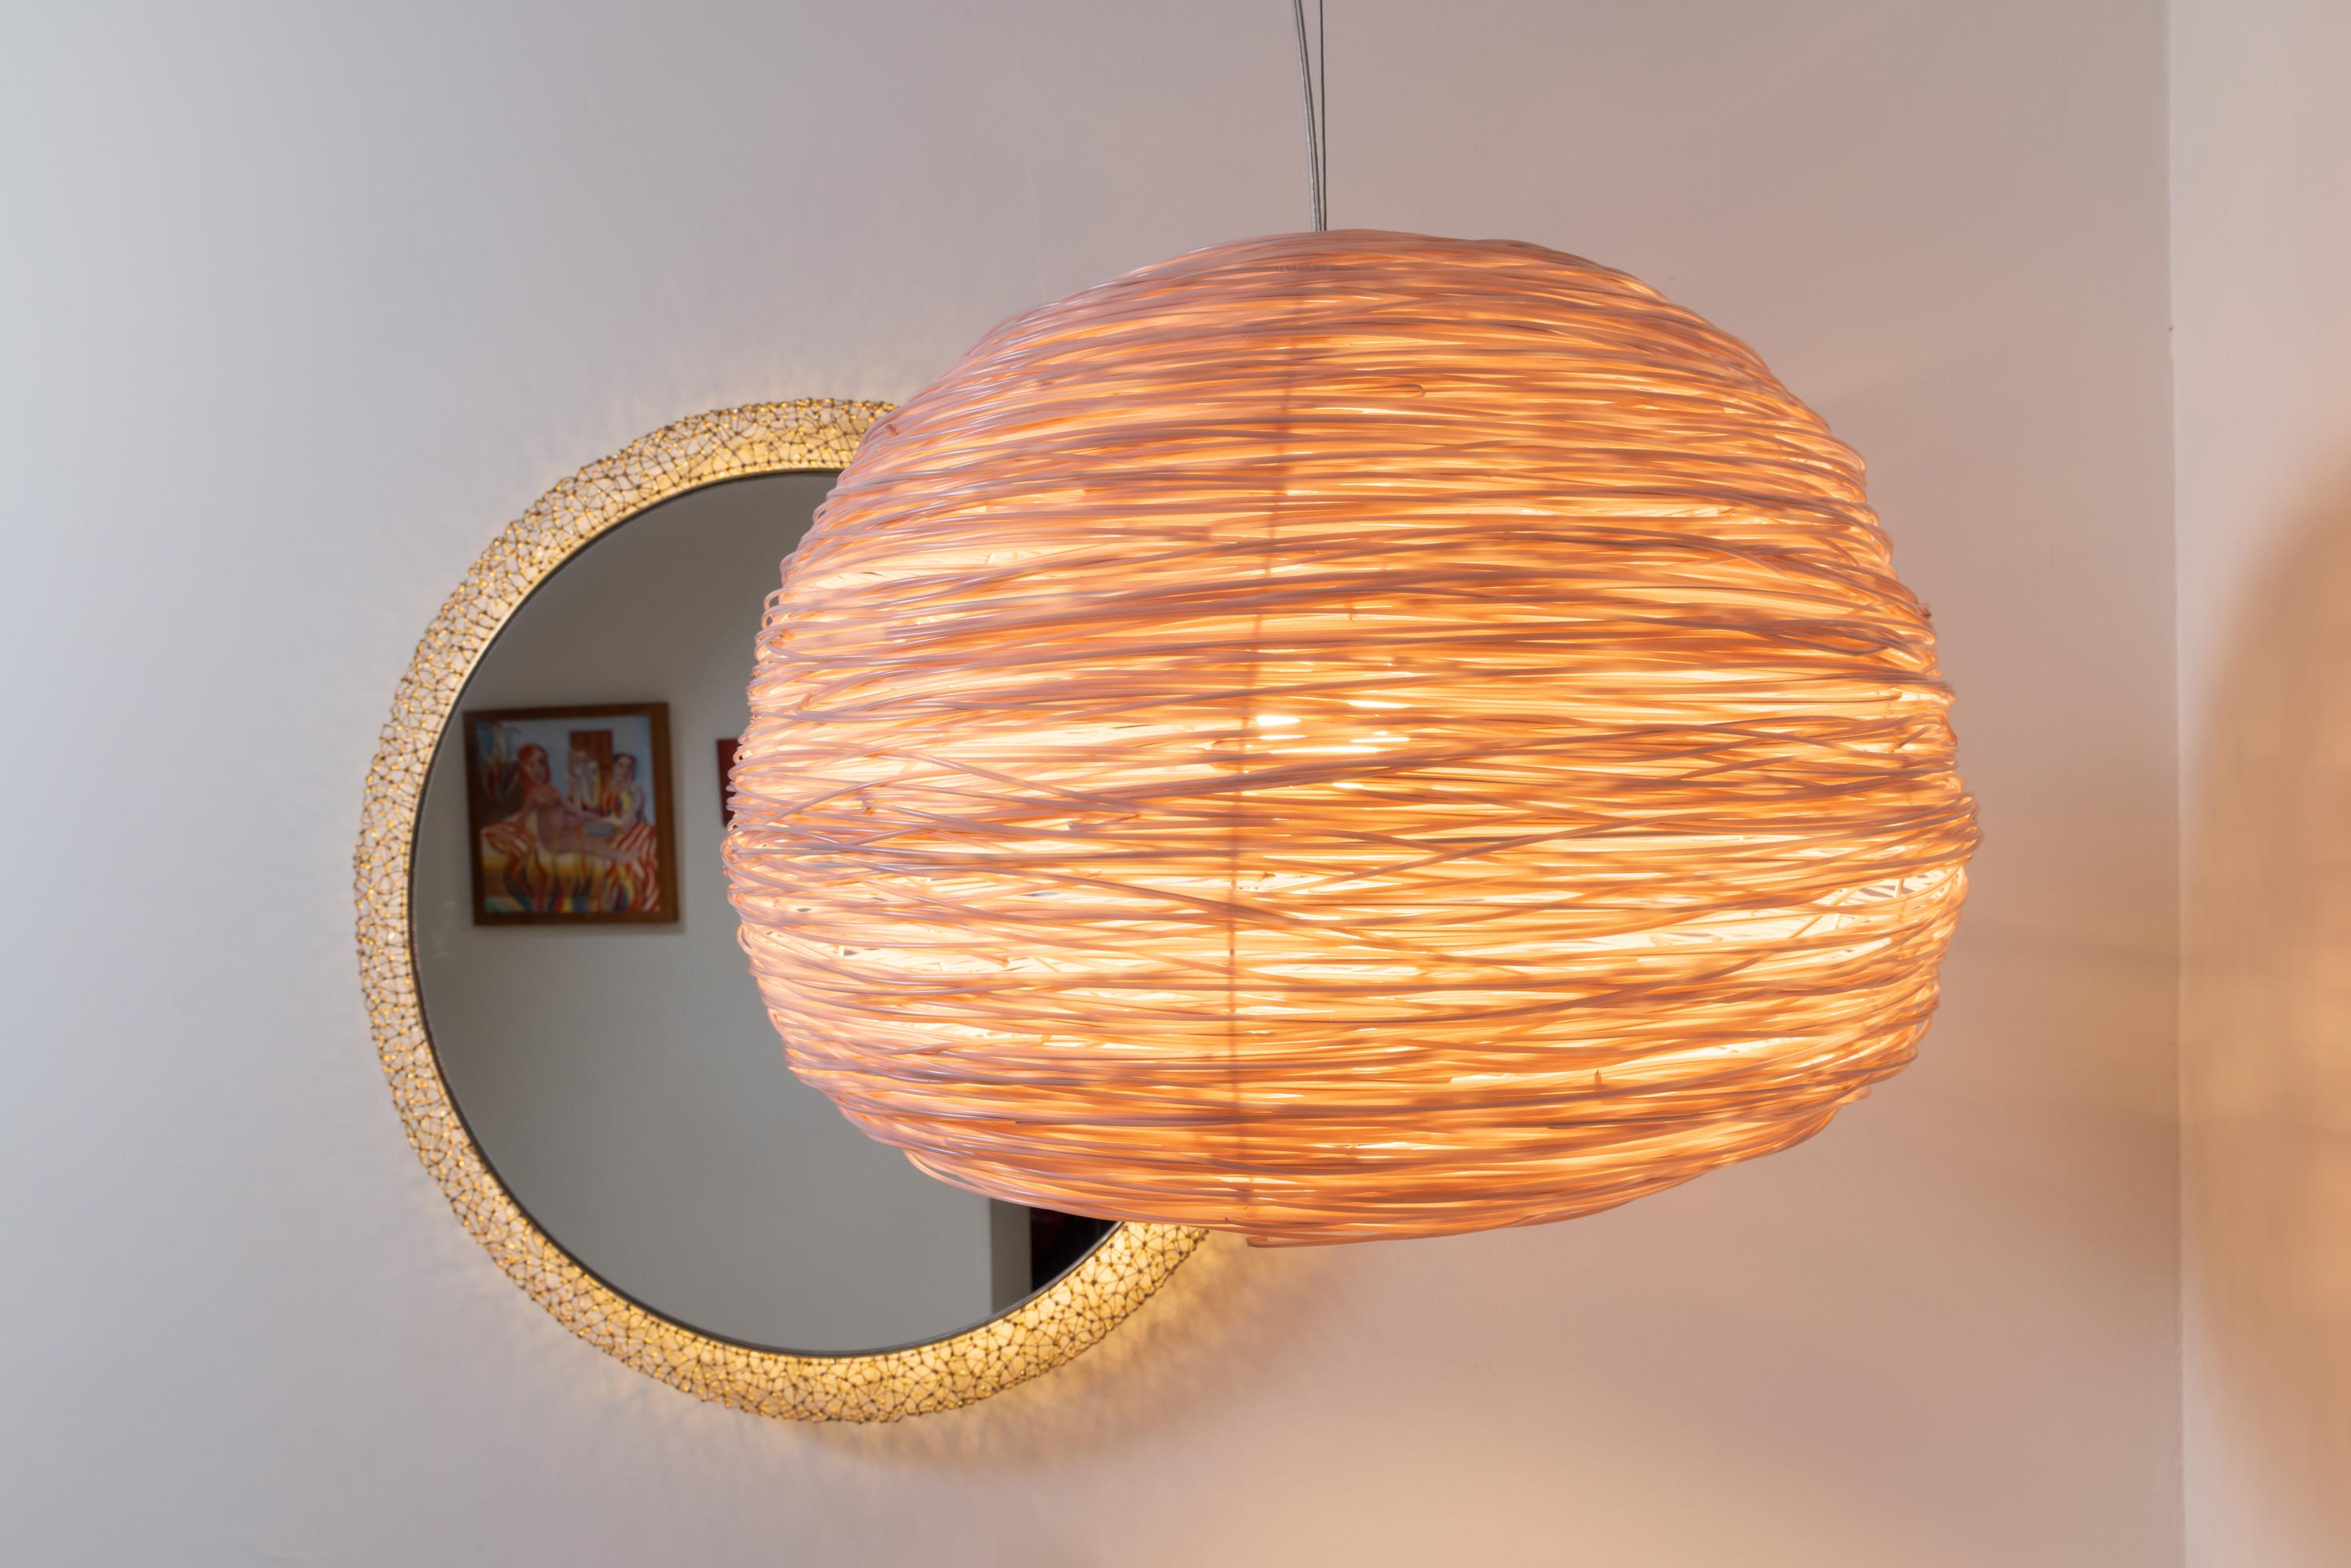 Shelter pendant in Pink is created with the elemental and universal form of a loosely woven nest like home, this is then incarnated by the light inside, which diffuses through many metres of lateral recycled polypropylene. 

The Shelter pendant